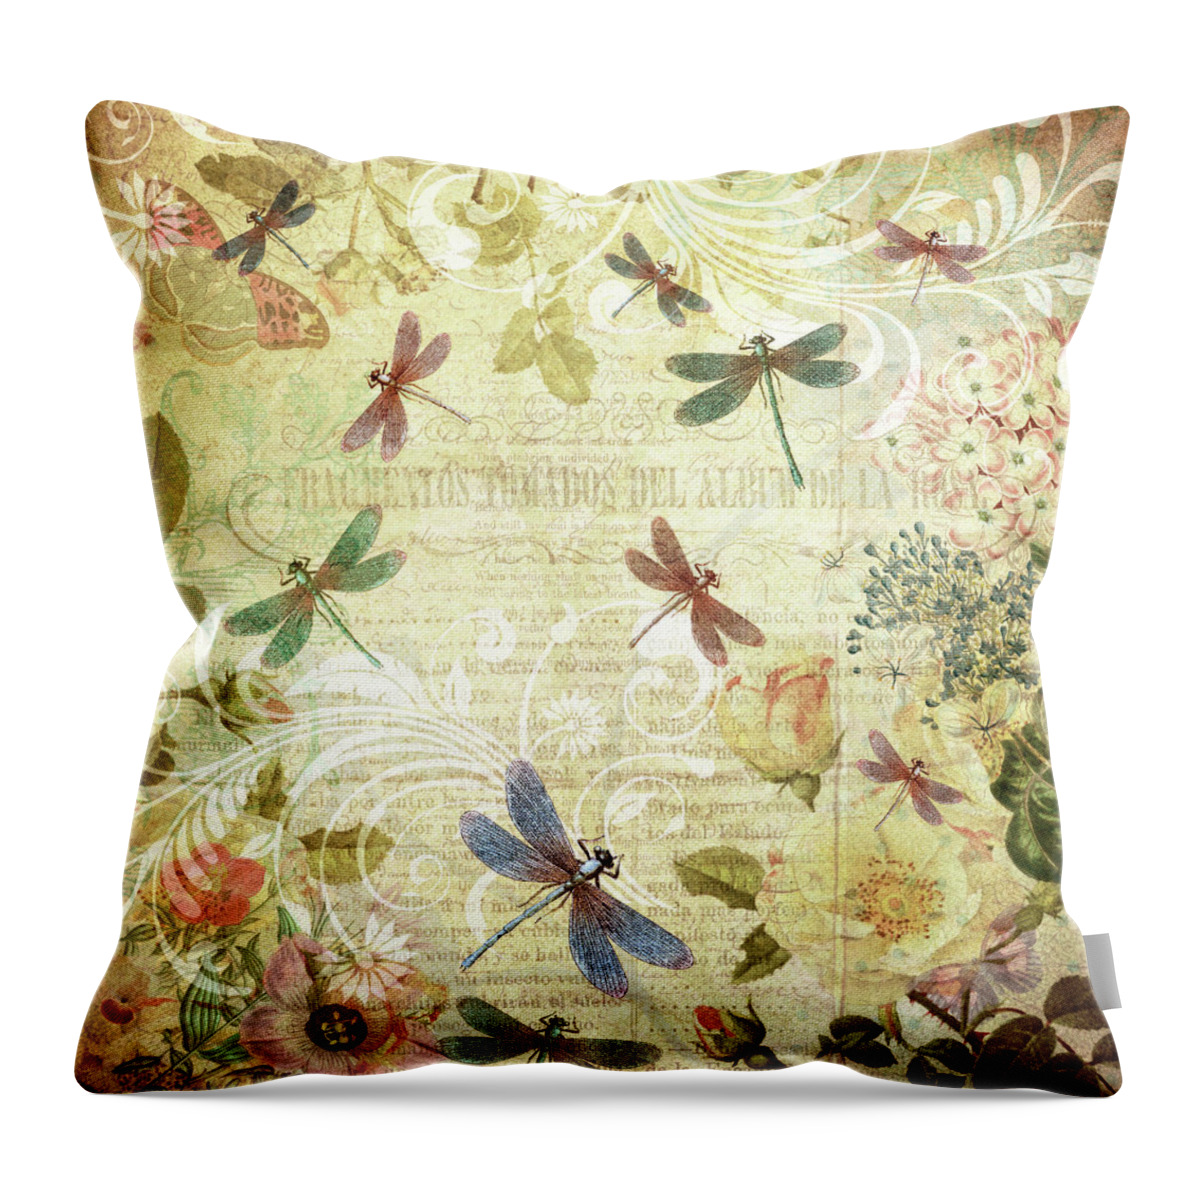 Dragonflies Throw Pillow featuring the mixed media Dragonfly Dreams - Antiqued by Peggy Collins